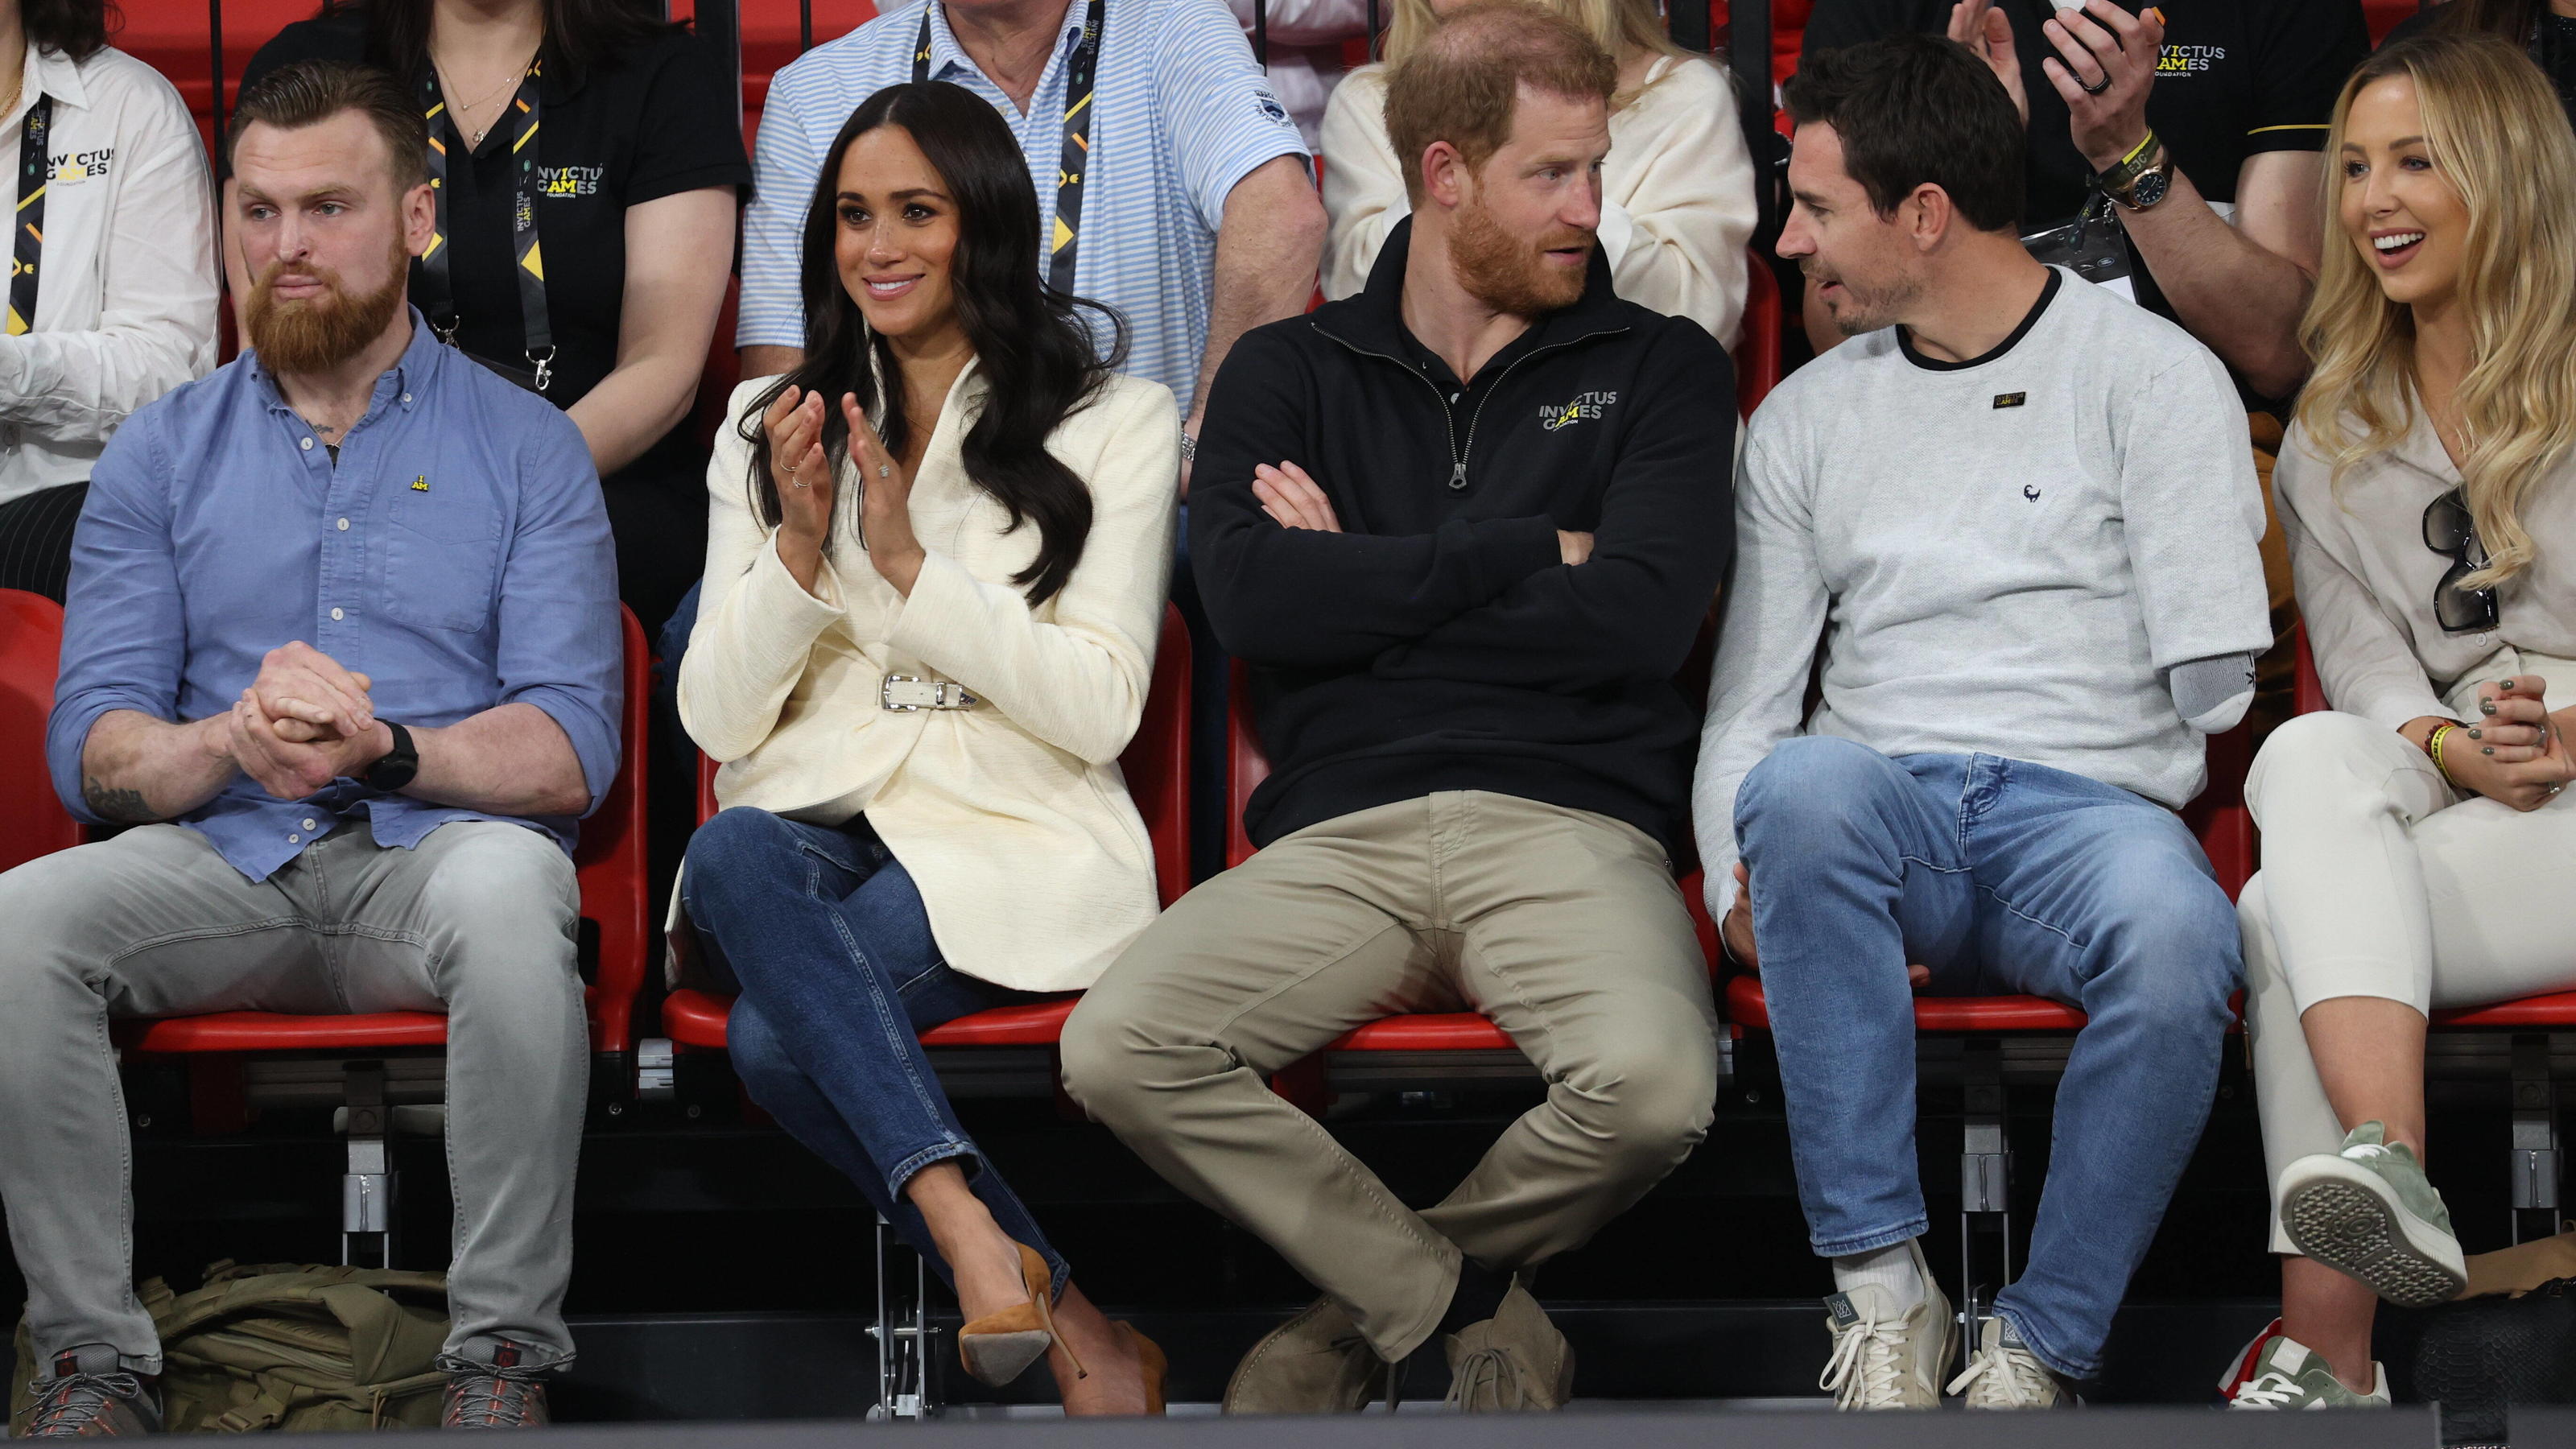  . 17/04/2022. The Hague, Netherlands. Prince Harry and Meghan Markle, the Duke and Duchess of Sussex, during the second day of the Invictus Games at The Hague, Holland. PUBLICATIONxINxGERxSUIxAUTxHUNxONLY xStephenxLockx/xi-Imagesx IIM-23325-0068